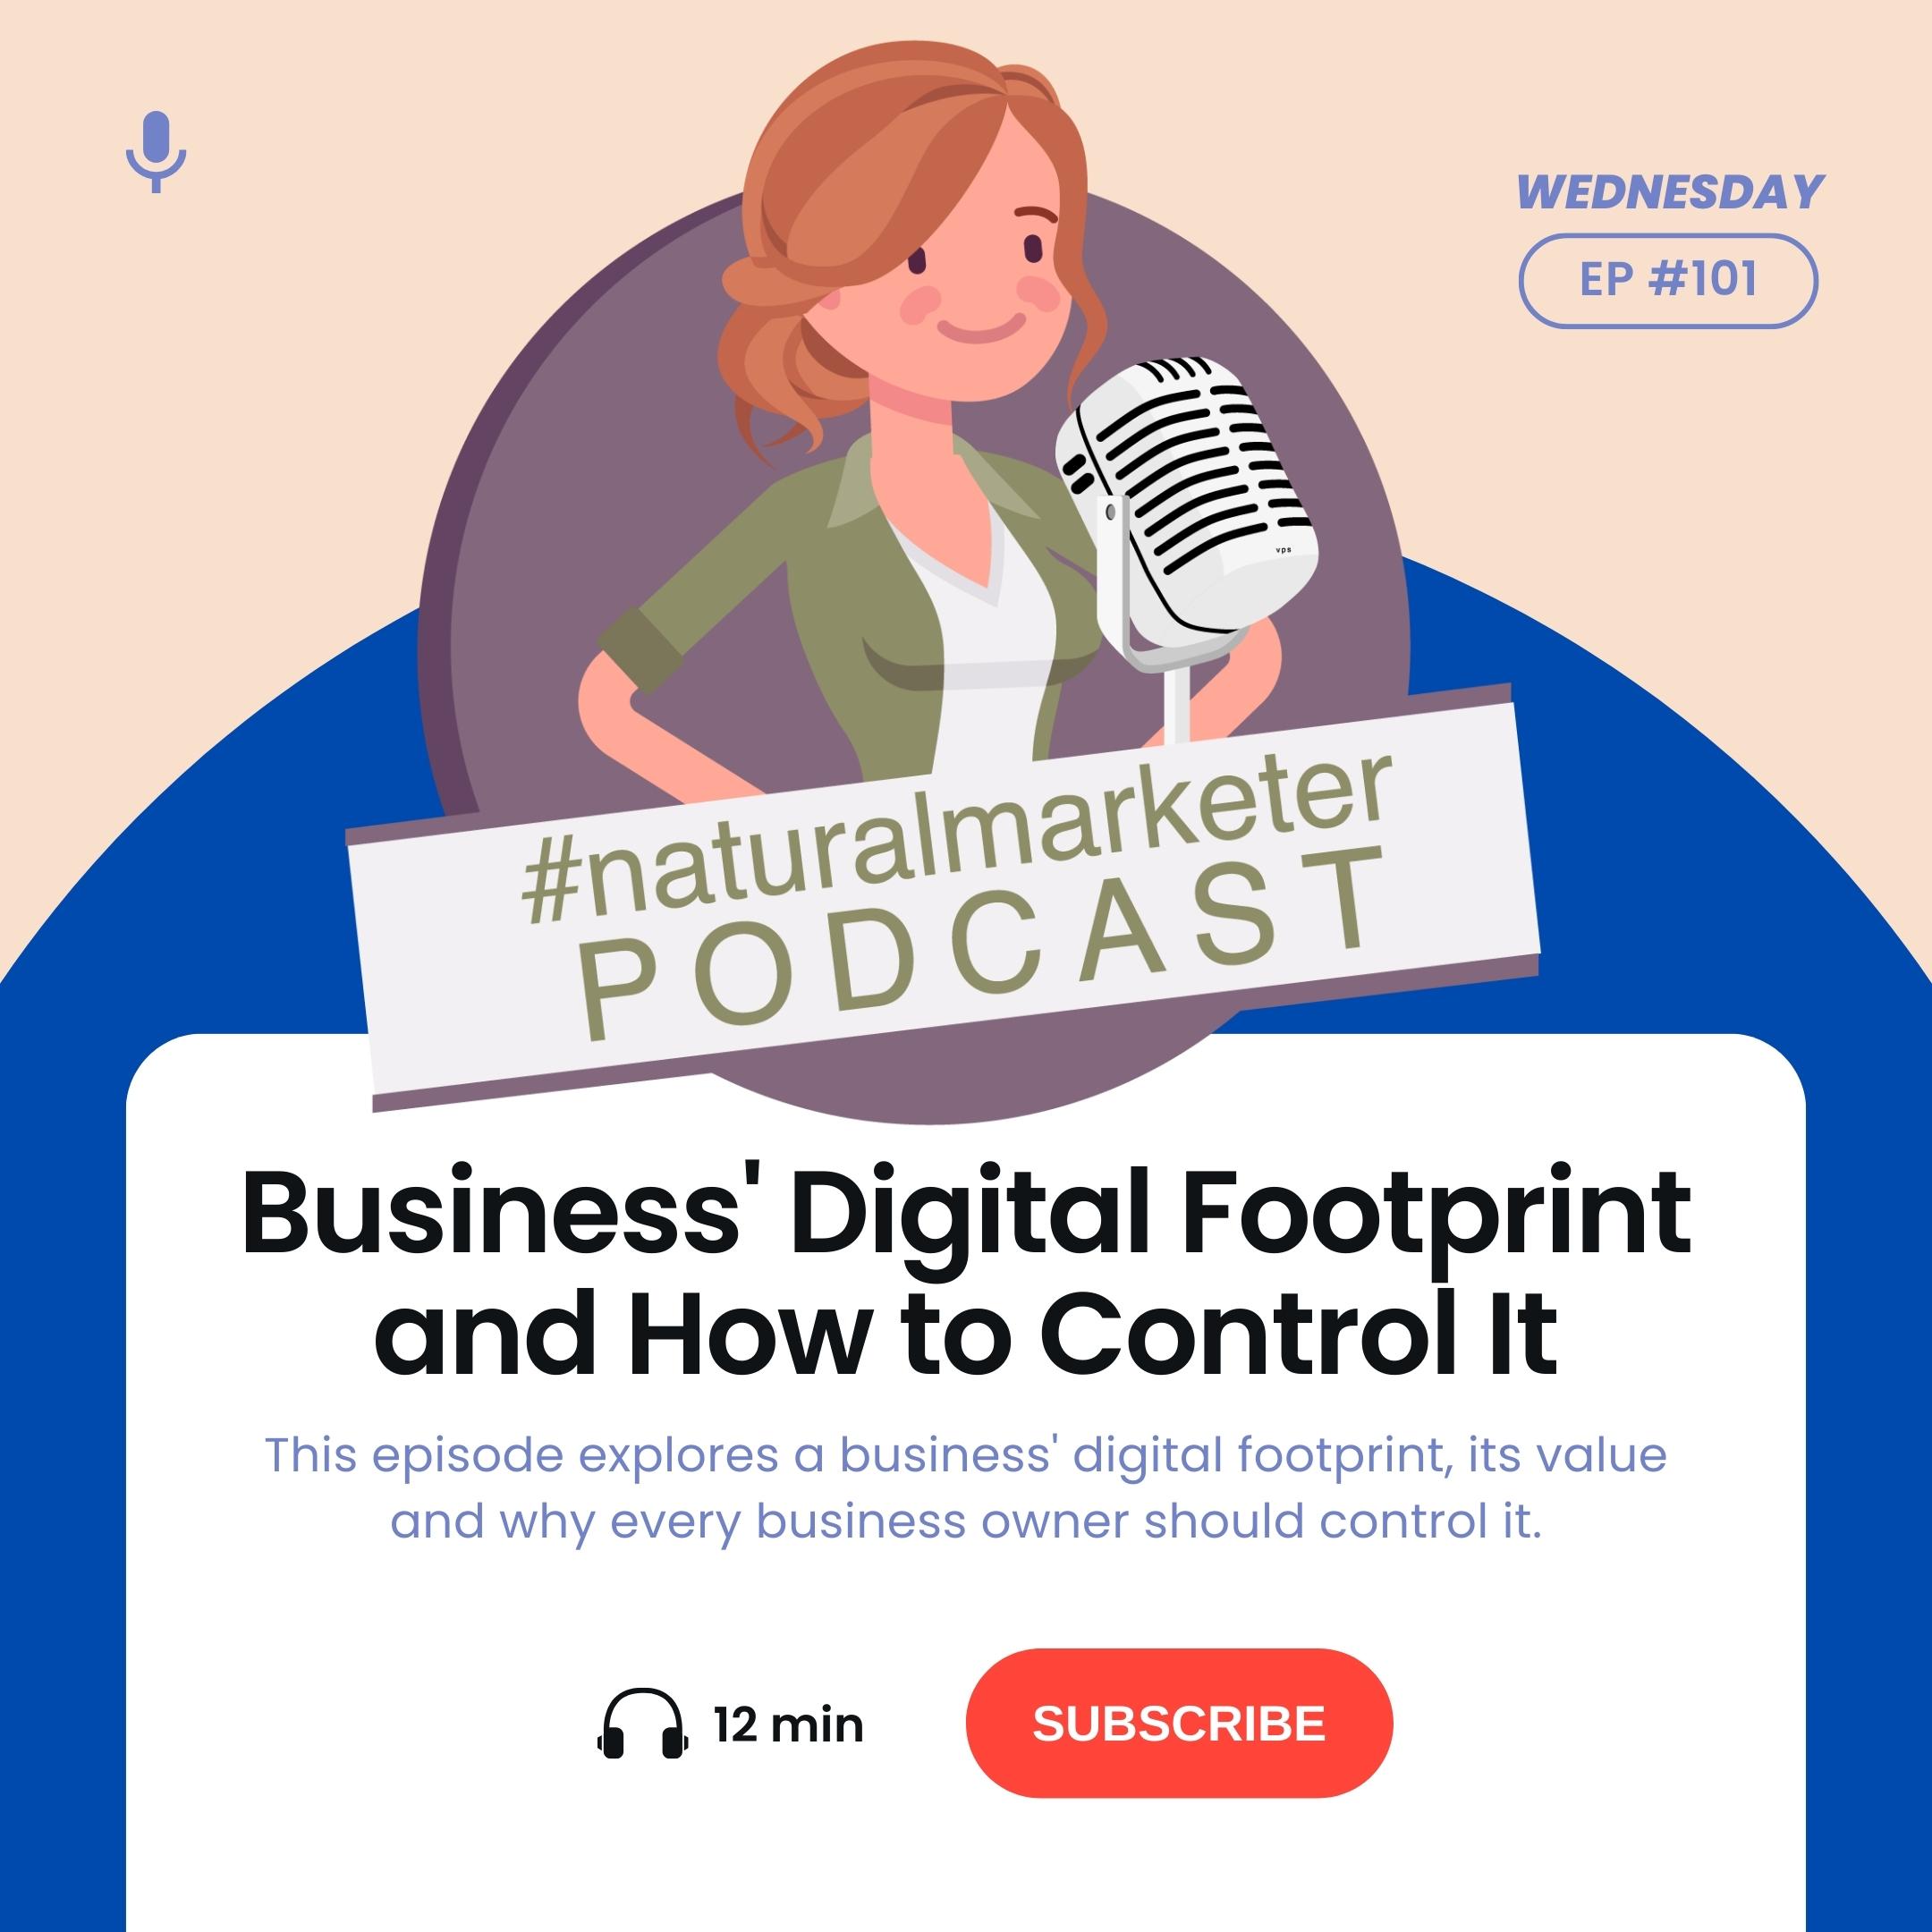 Episode 1: Business' Digital Footprint and How to Control It